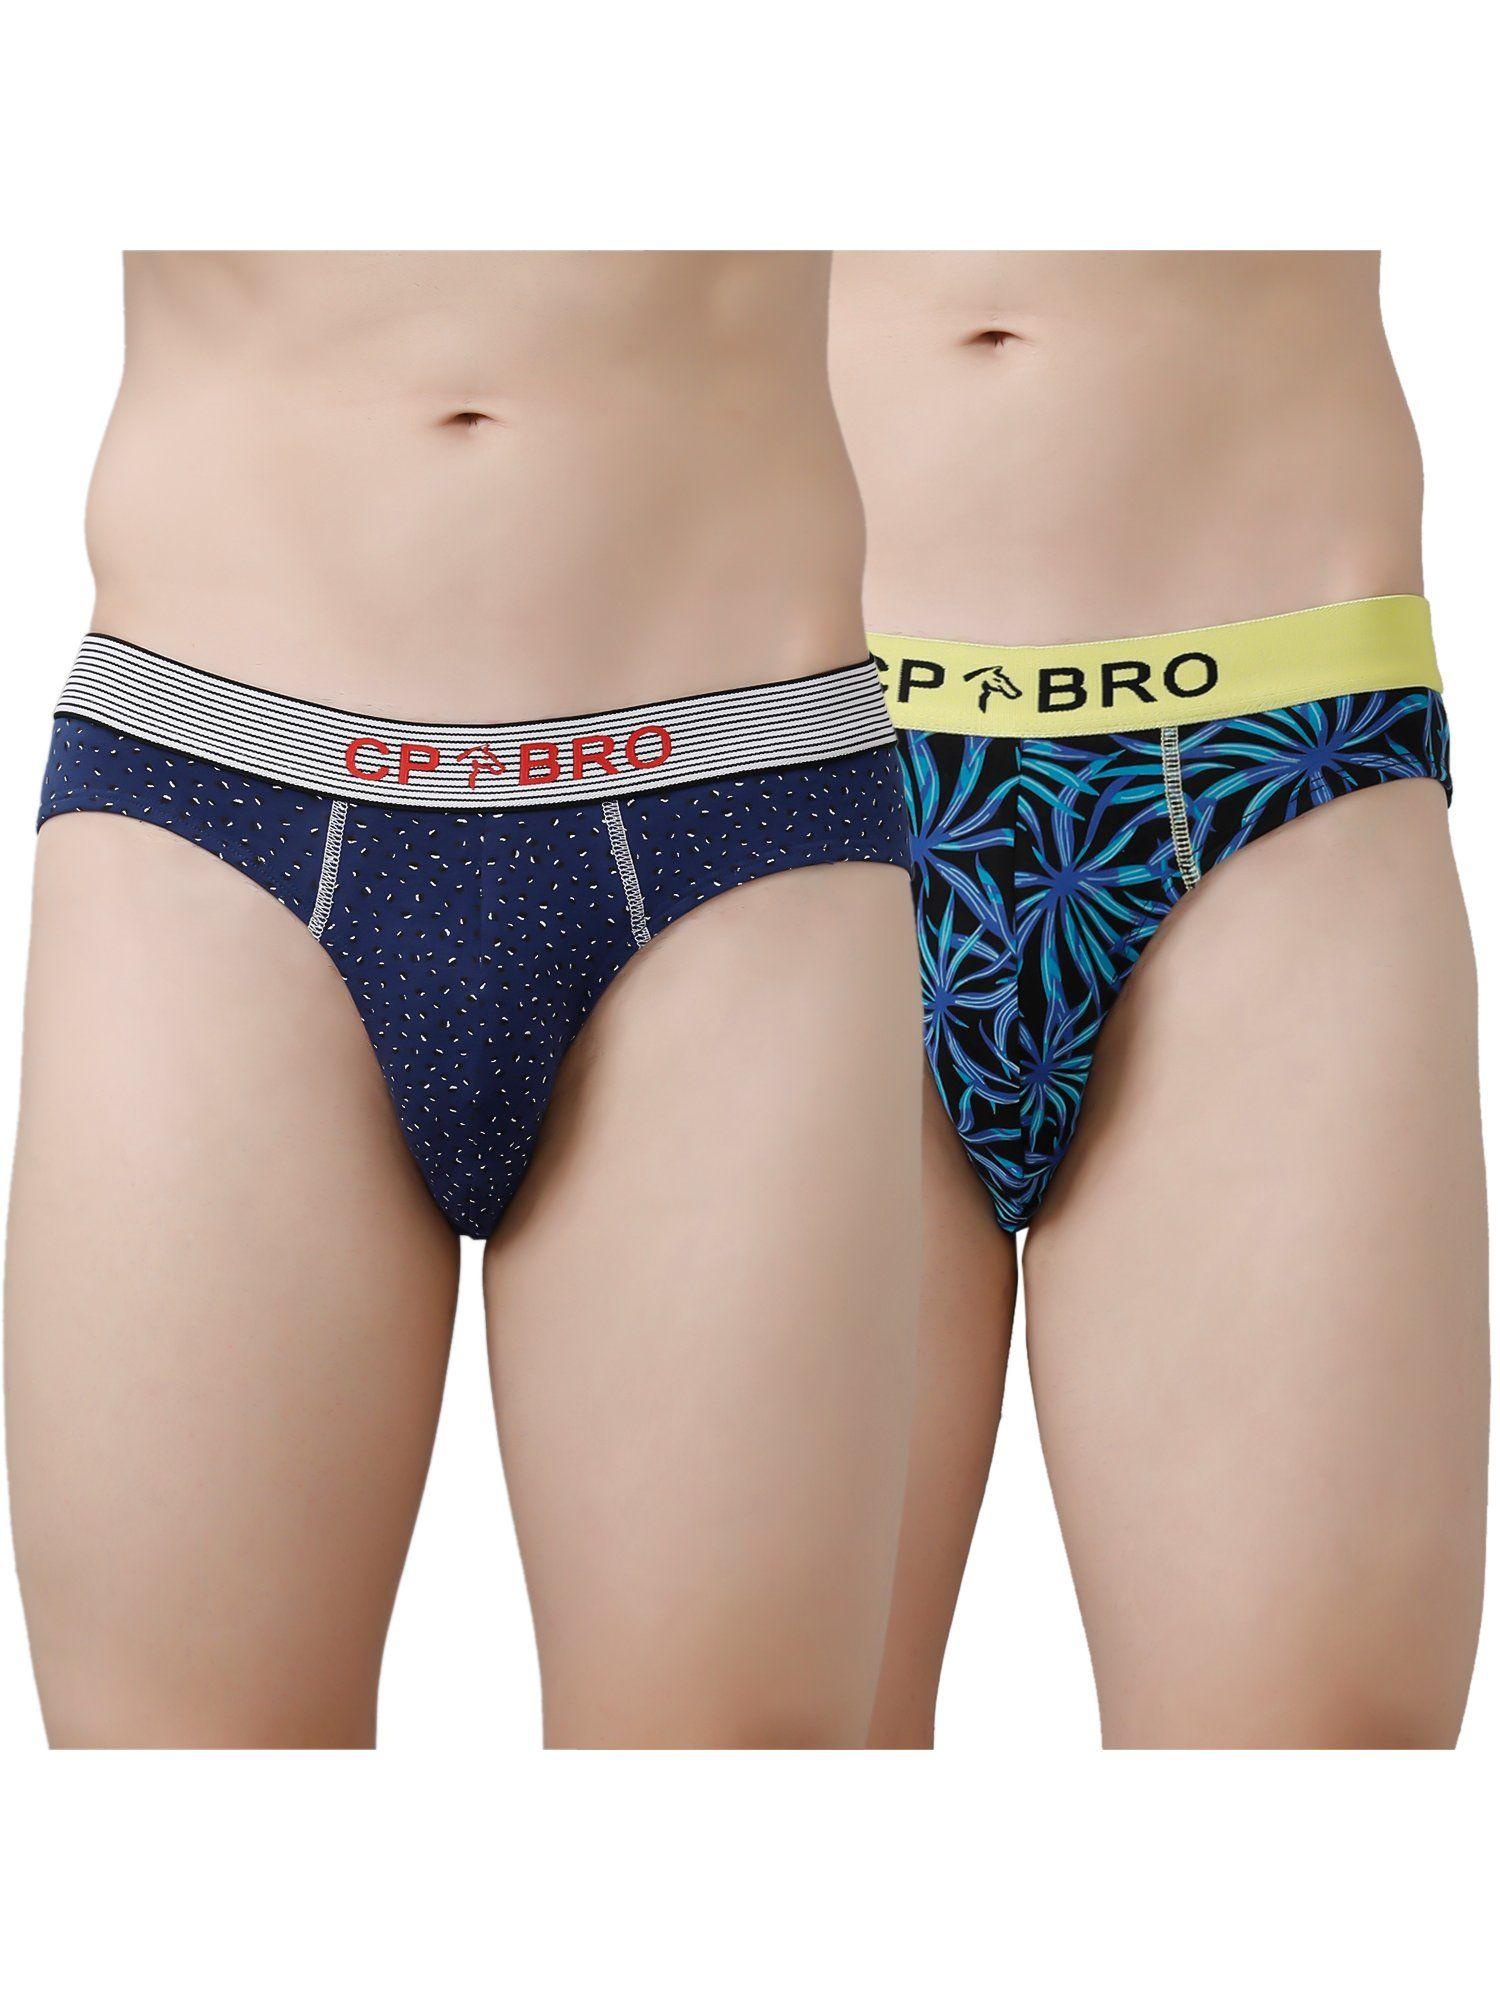 printed briefs with exposed waistband value - navy dot & blue leaf (pack of 2)